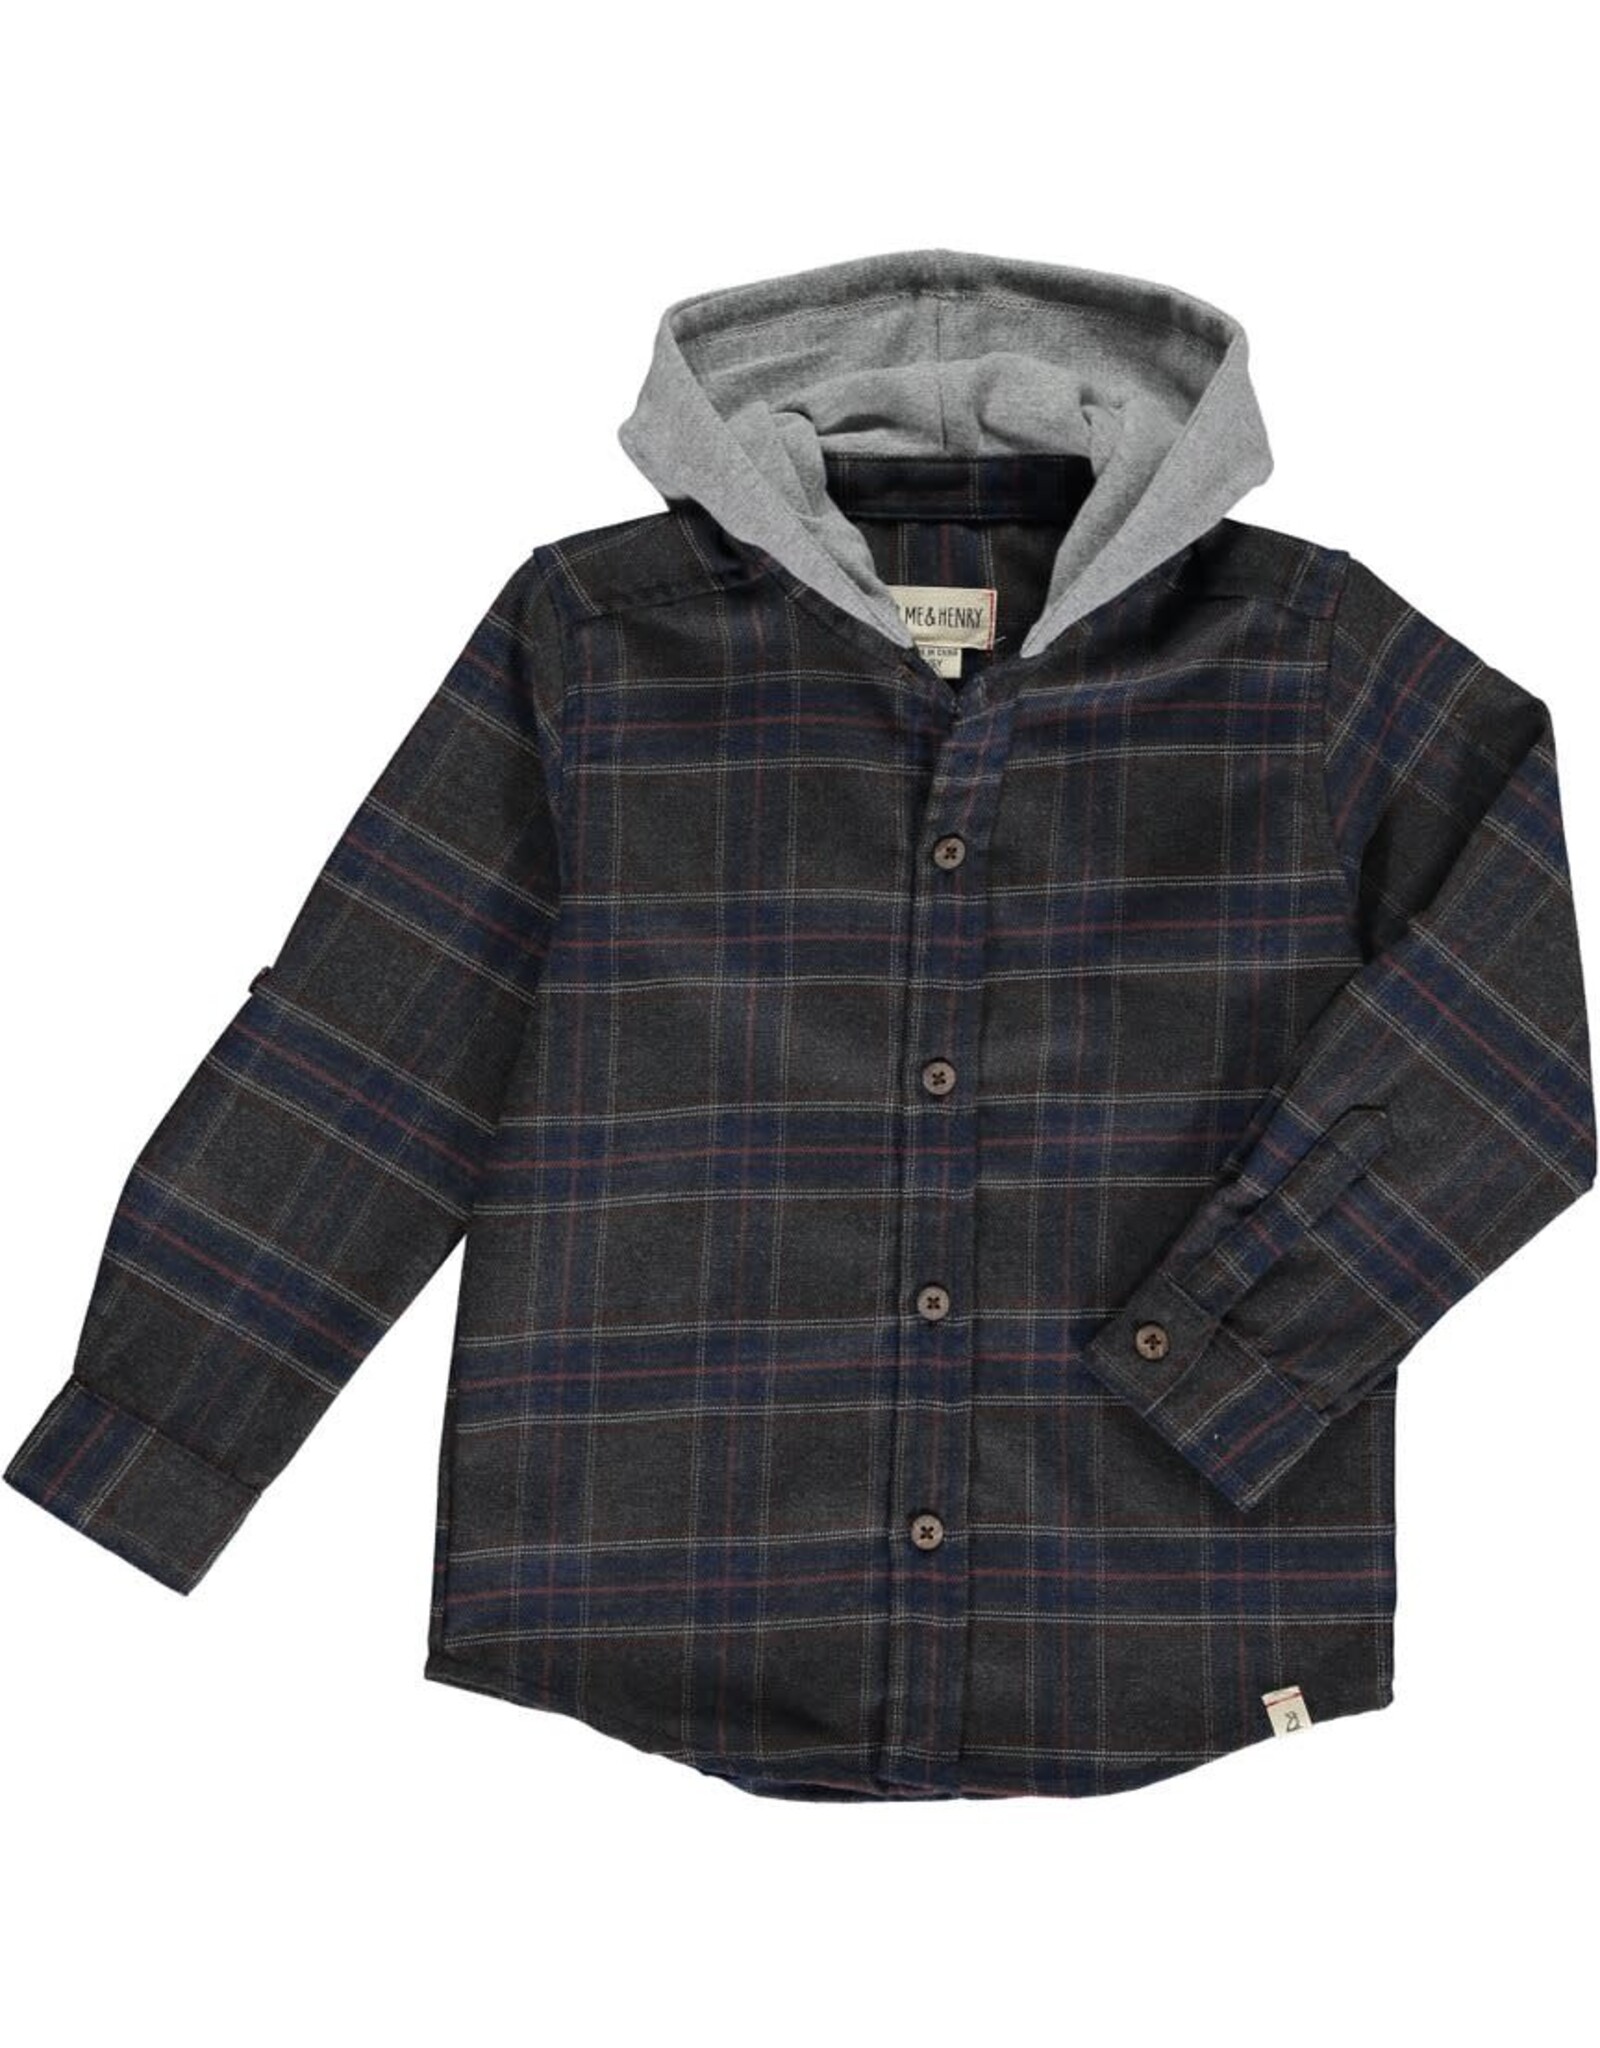 Me & Henry Erin Hooded Woven Shirt-Charcoal Blue Plaid